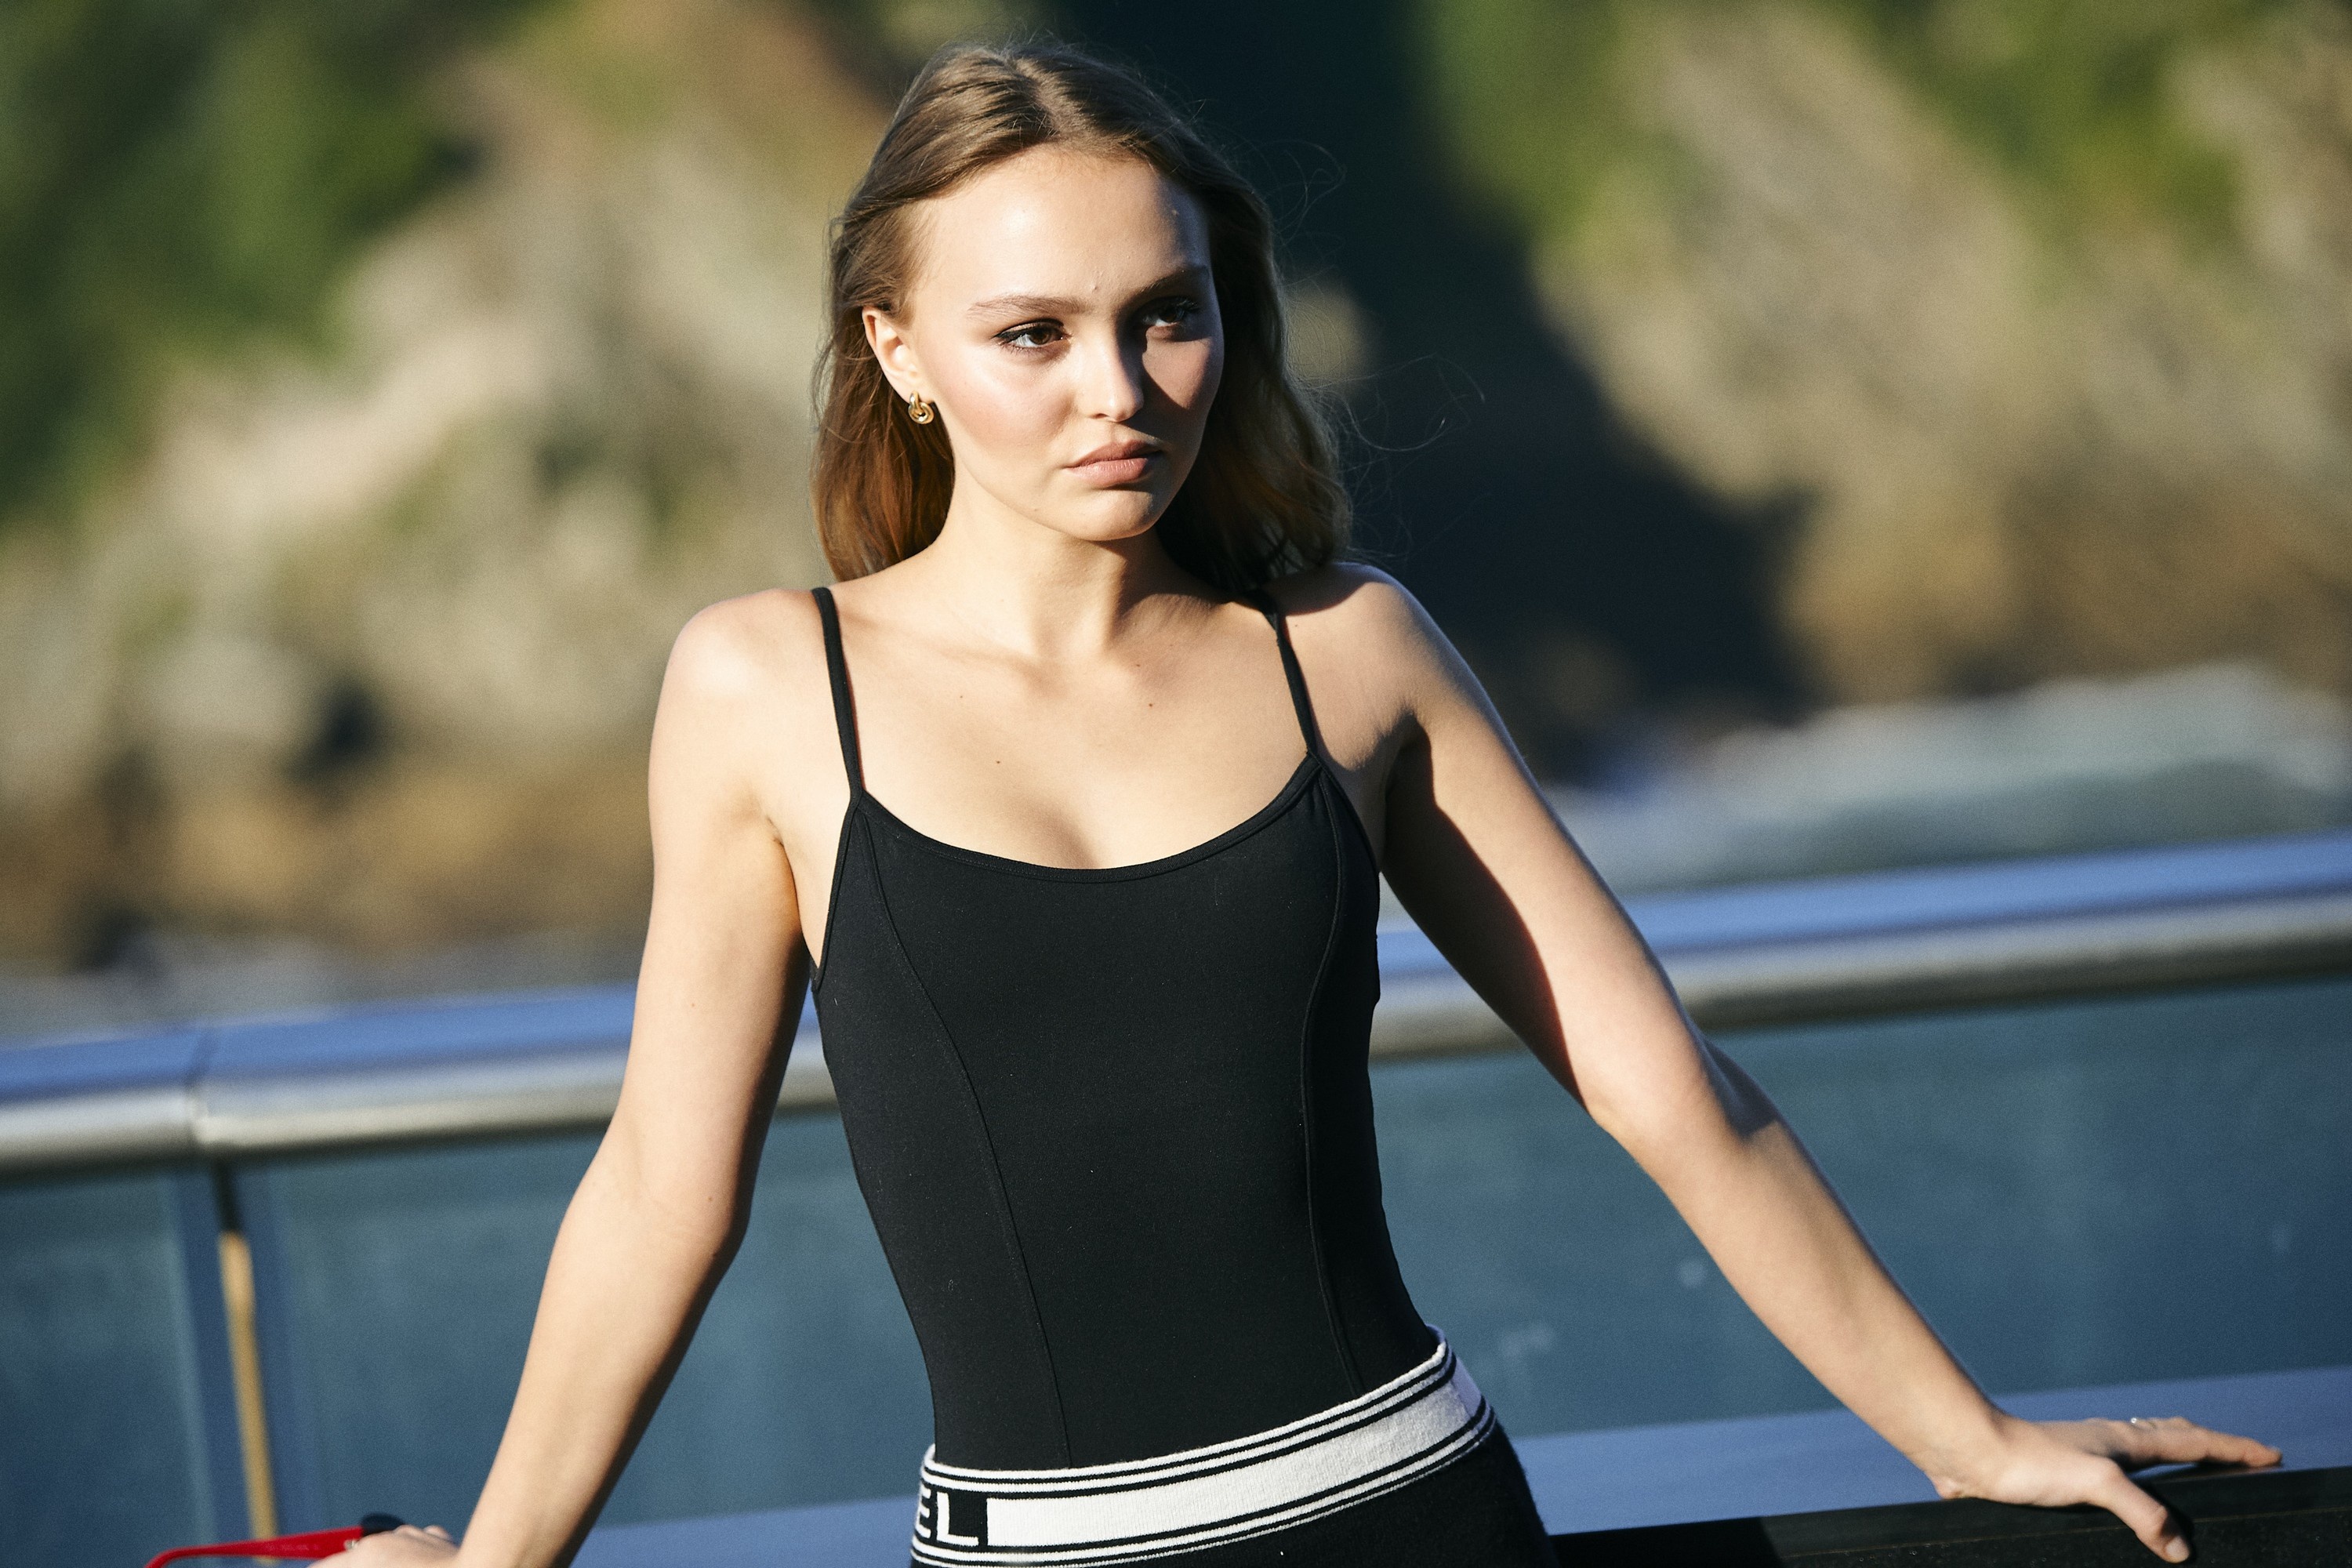 Lily-Rose Depp, HD wallpapers, Fashion magazine features, Celebrity vibes, 3000x2000 HD Desktop